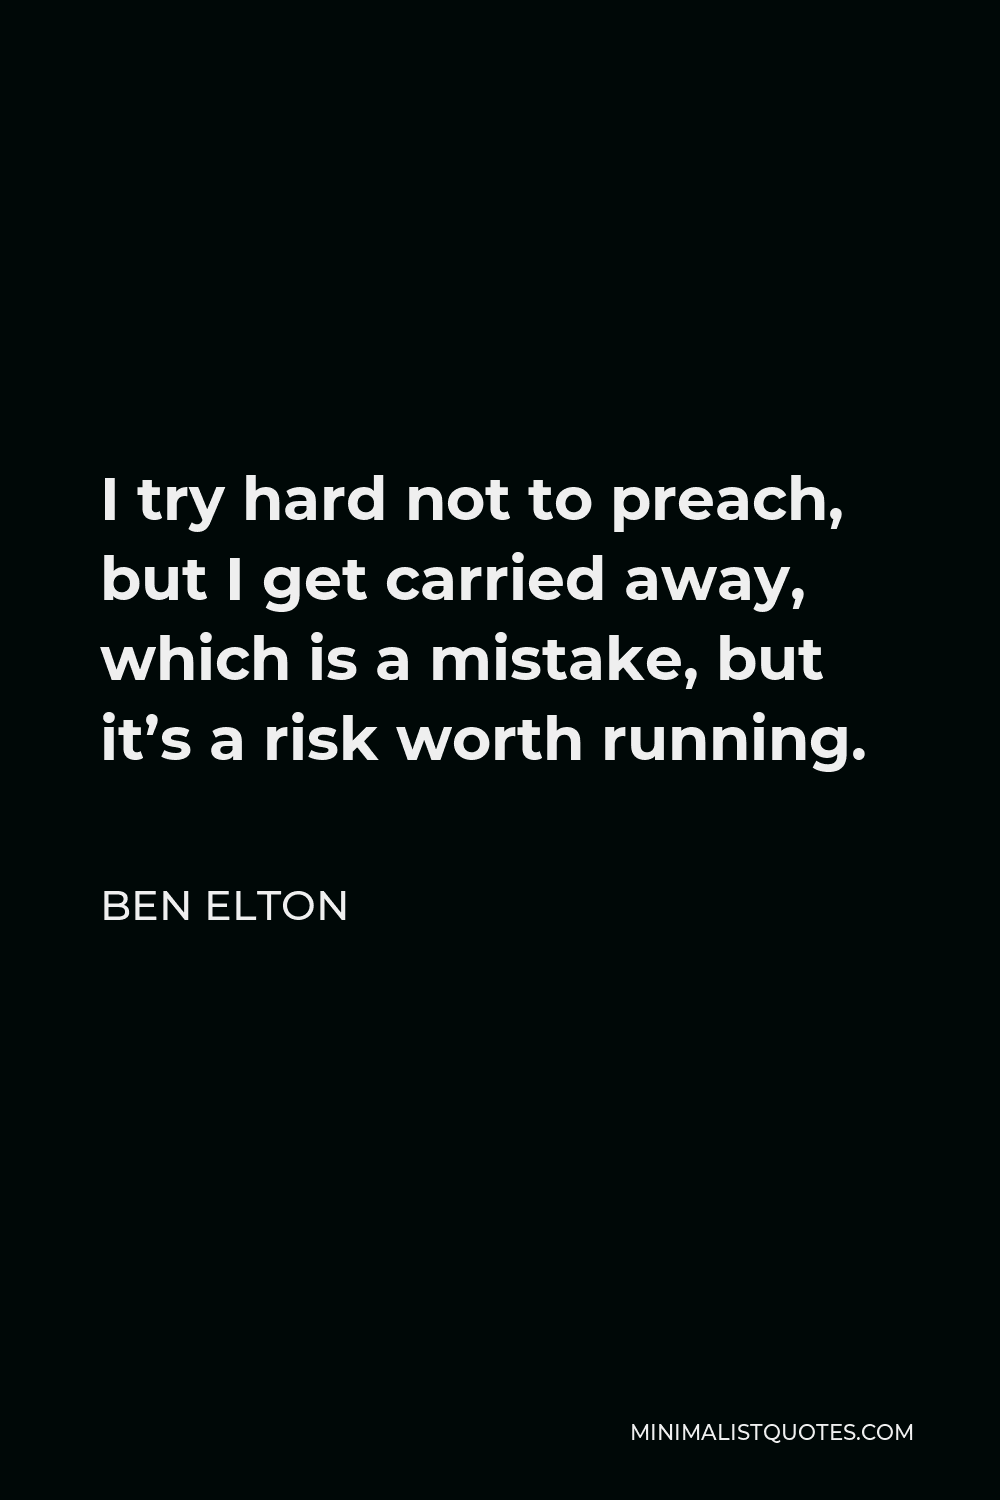 Ben Elton Quote - I try hard not to preach, but I get carried away, which is a mistake, but it’s a risk worth running.